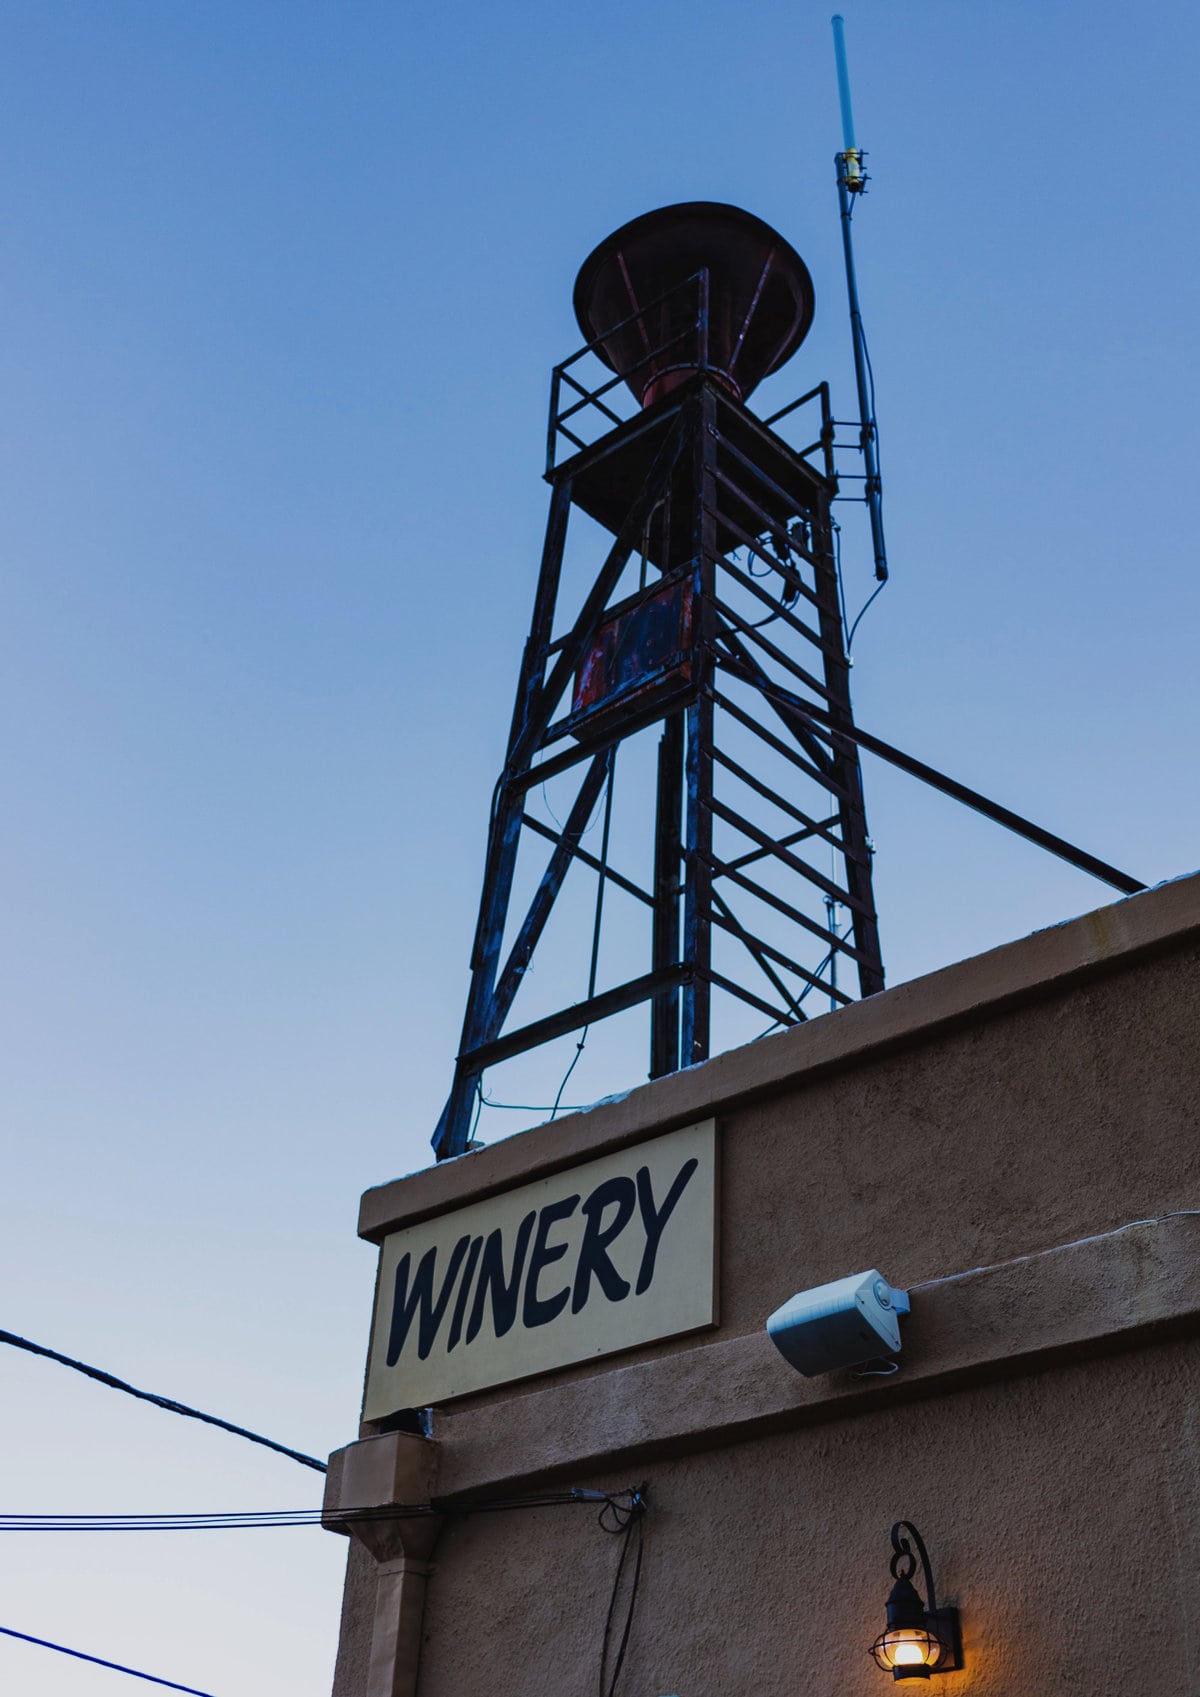 A winery sign in Jerome, Arizona